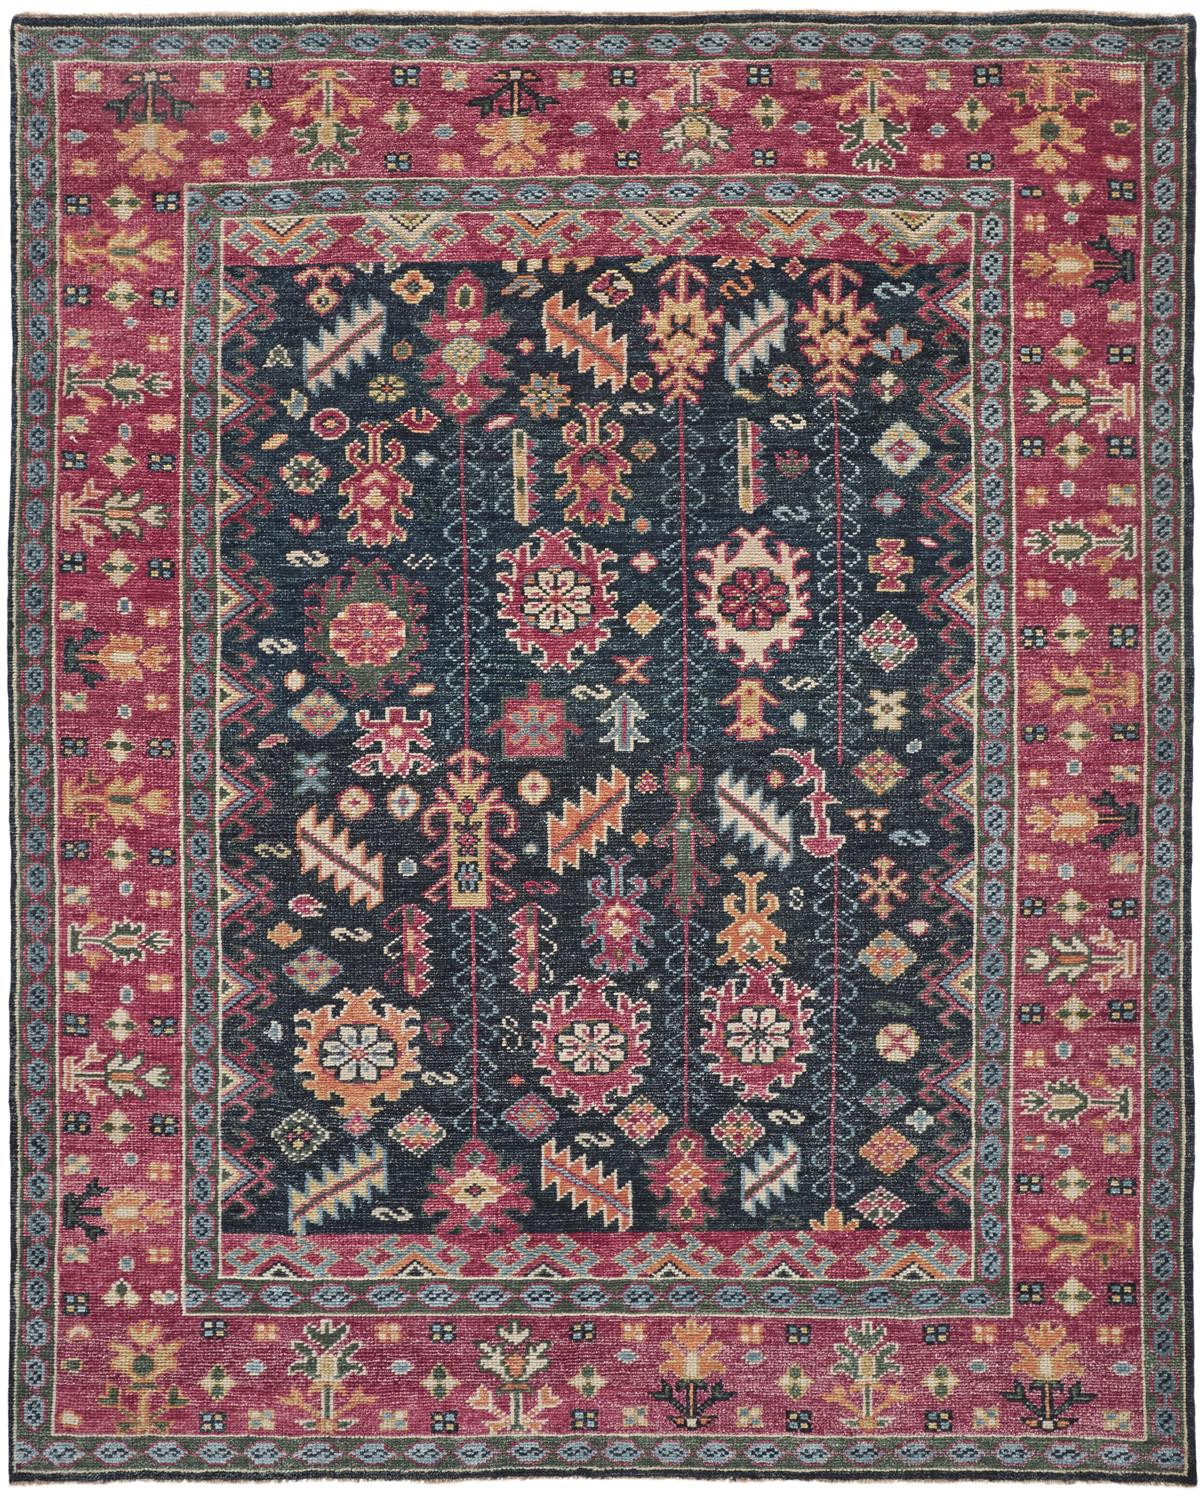 8' X 10' Pink Blue And Orange Wool Floral Hand Knotted Distressed Stain Resistant Area Rug With Fringe-511645-1